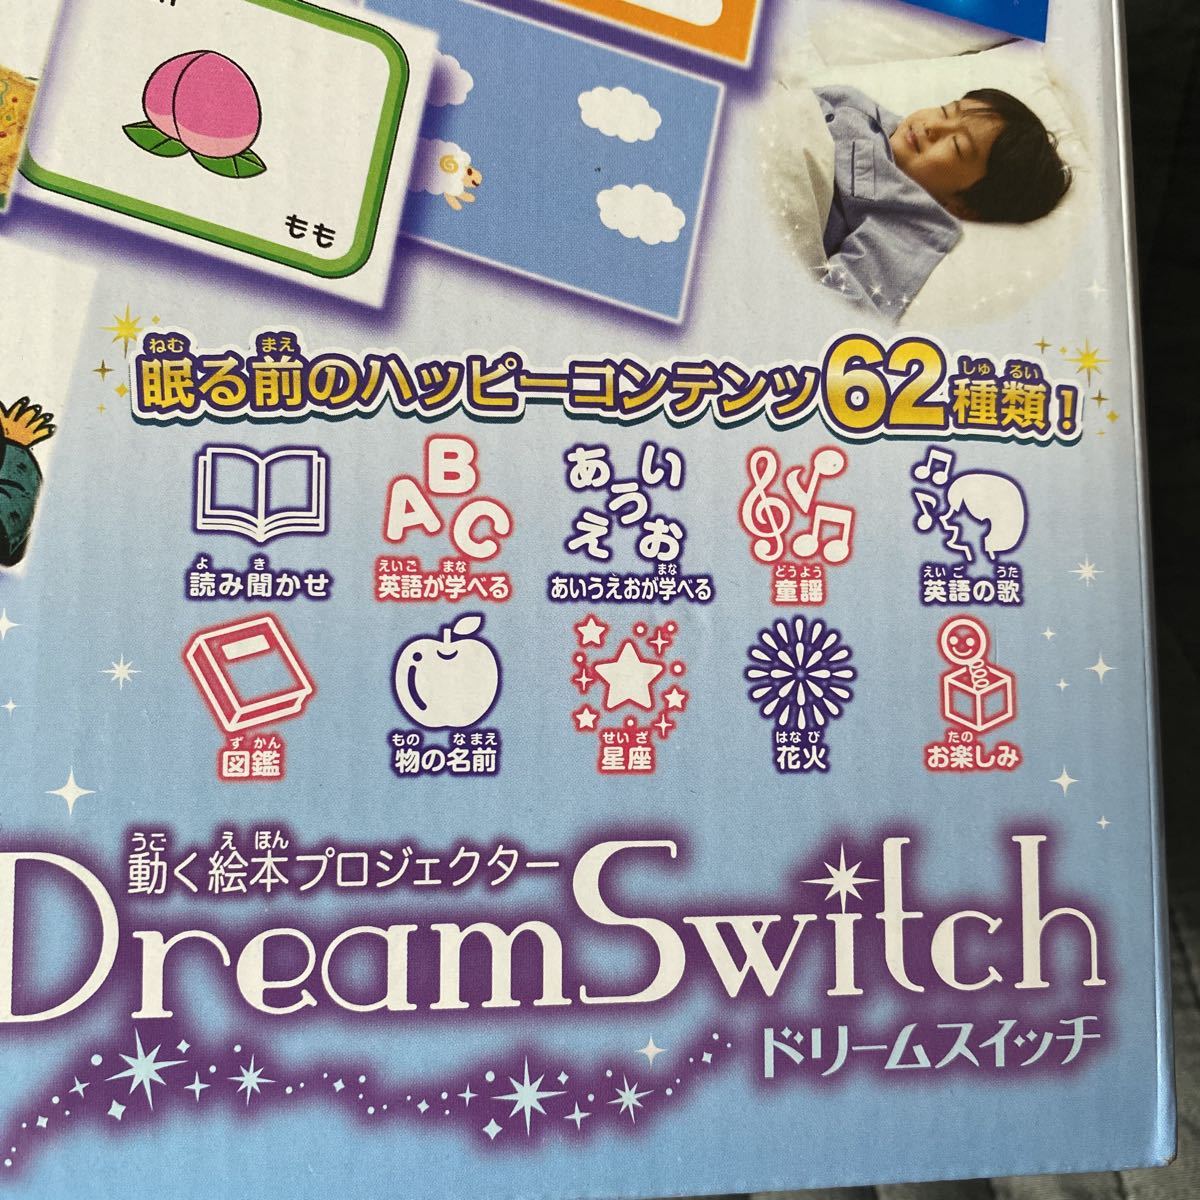  new goods Dream switch body & exclusive use soft 1 Disney set move picture book projector Dream hole snow Toy Story Monstar z ink 